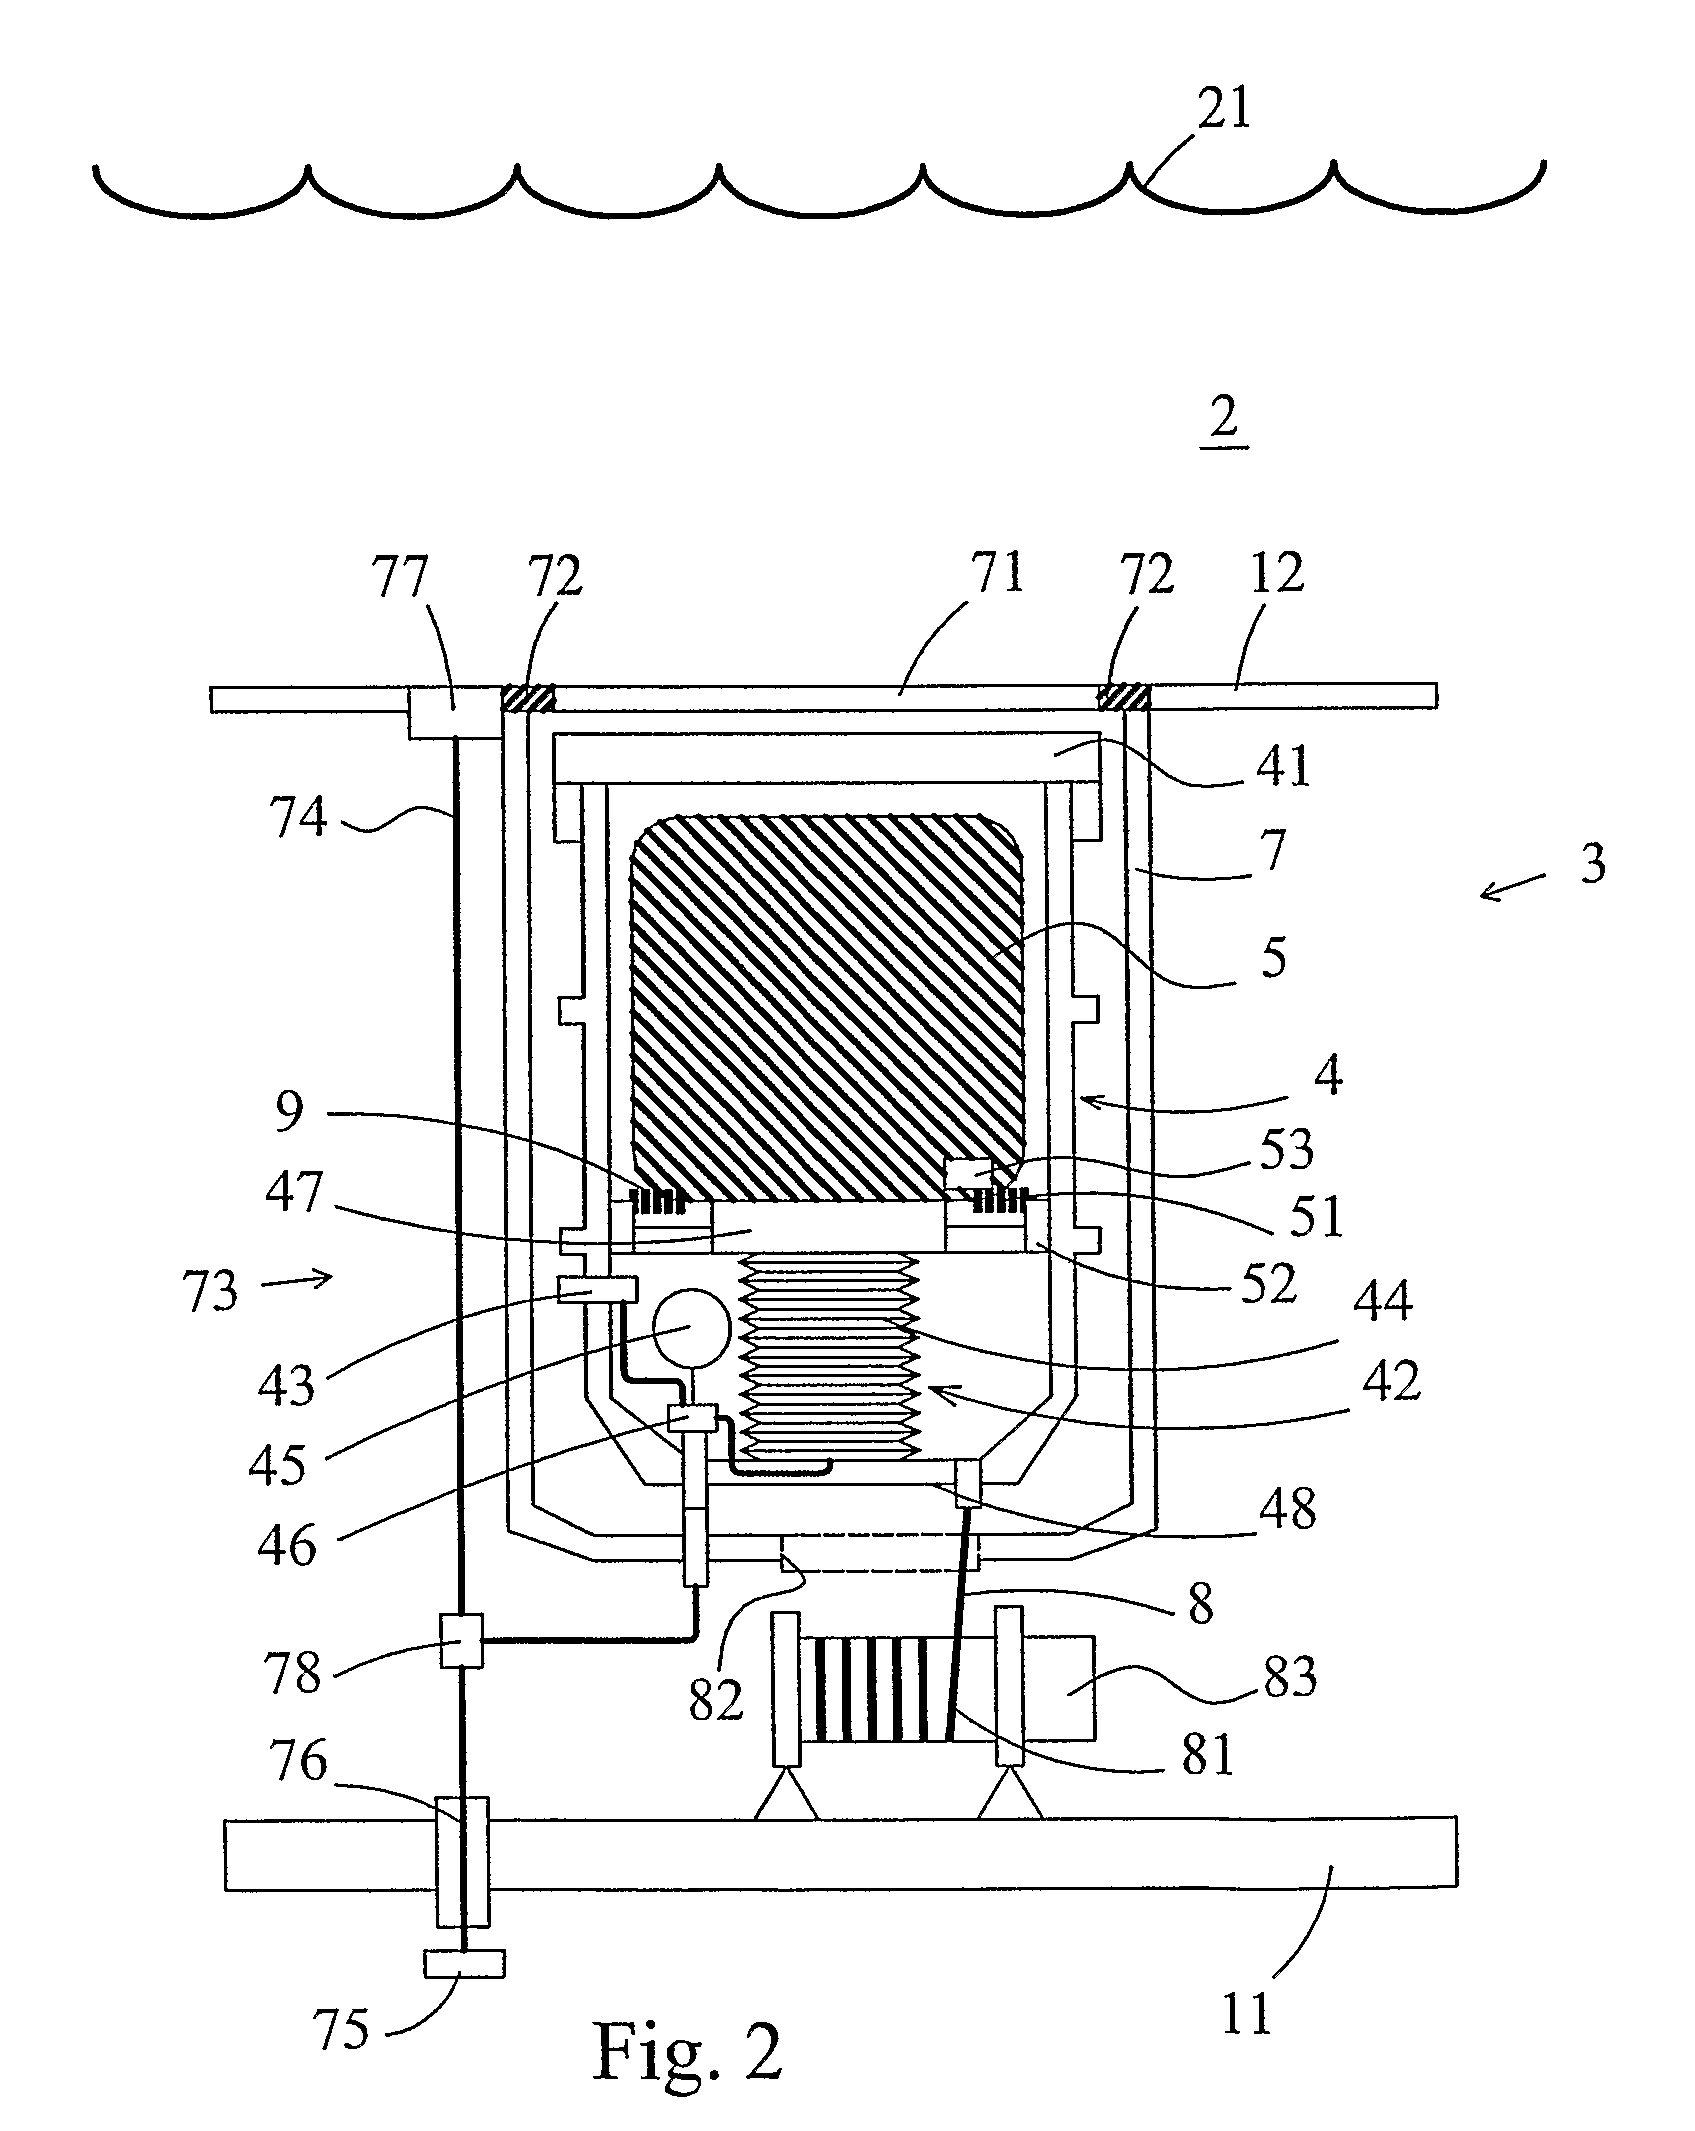 Assembly for deploying a payload from a submarine